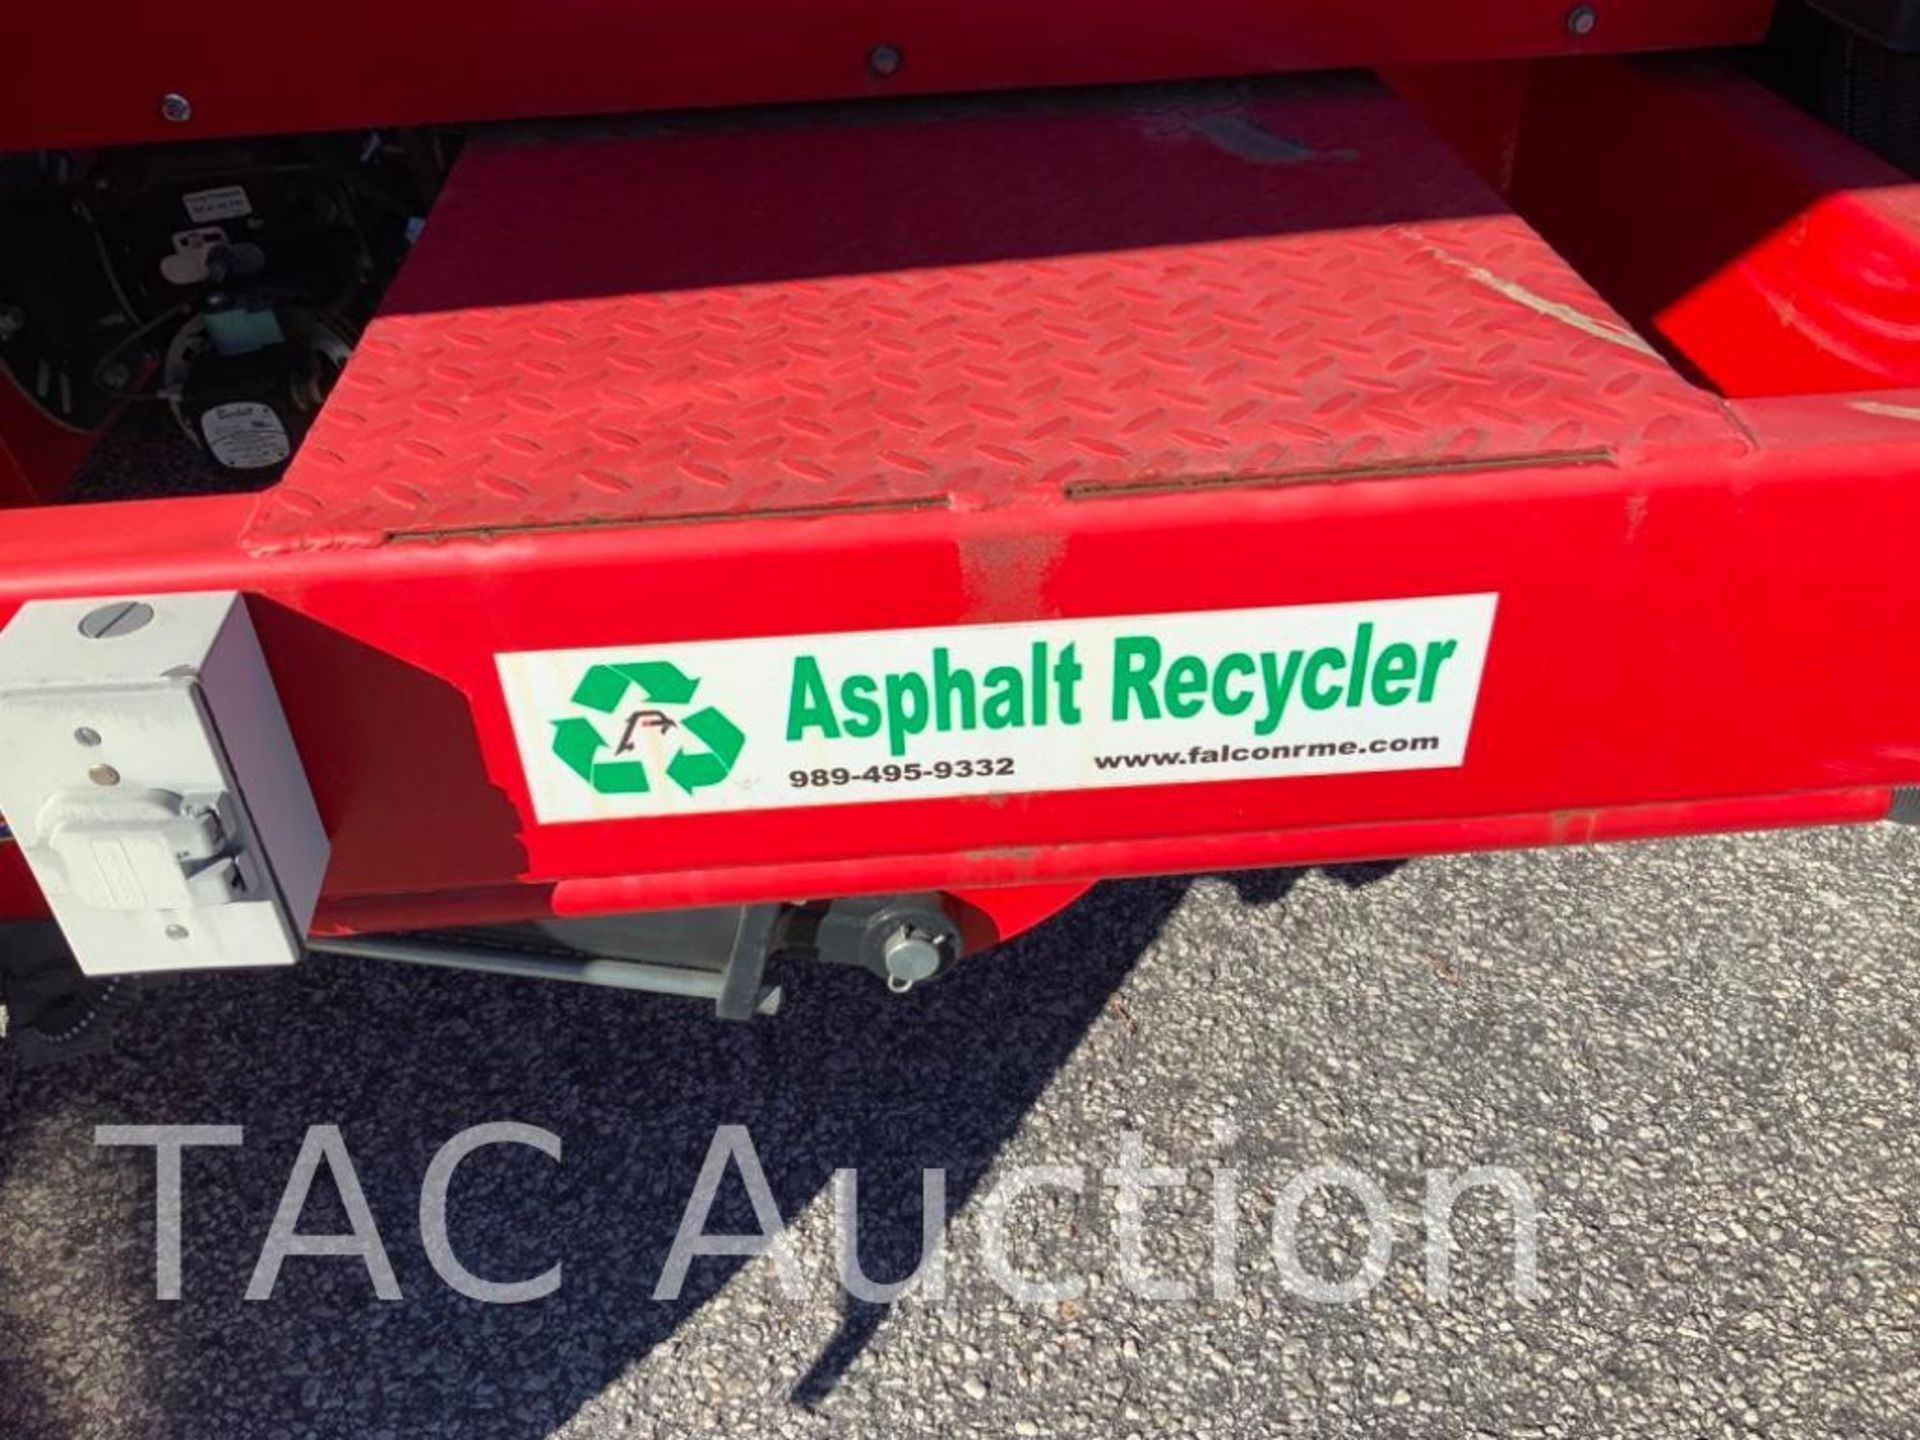 2010 4 Ton Falcon Towable Asphalt Recycler and Hot Box Trailer - Image 18 of 29